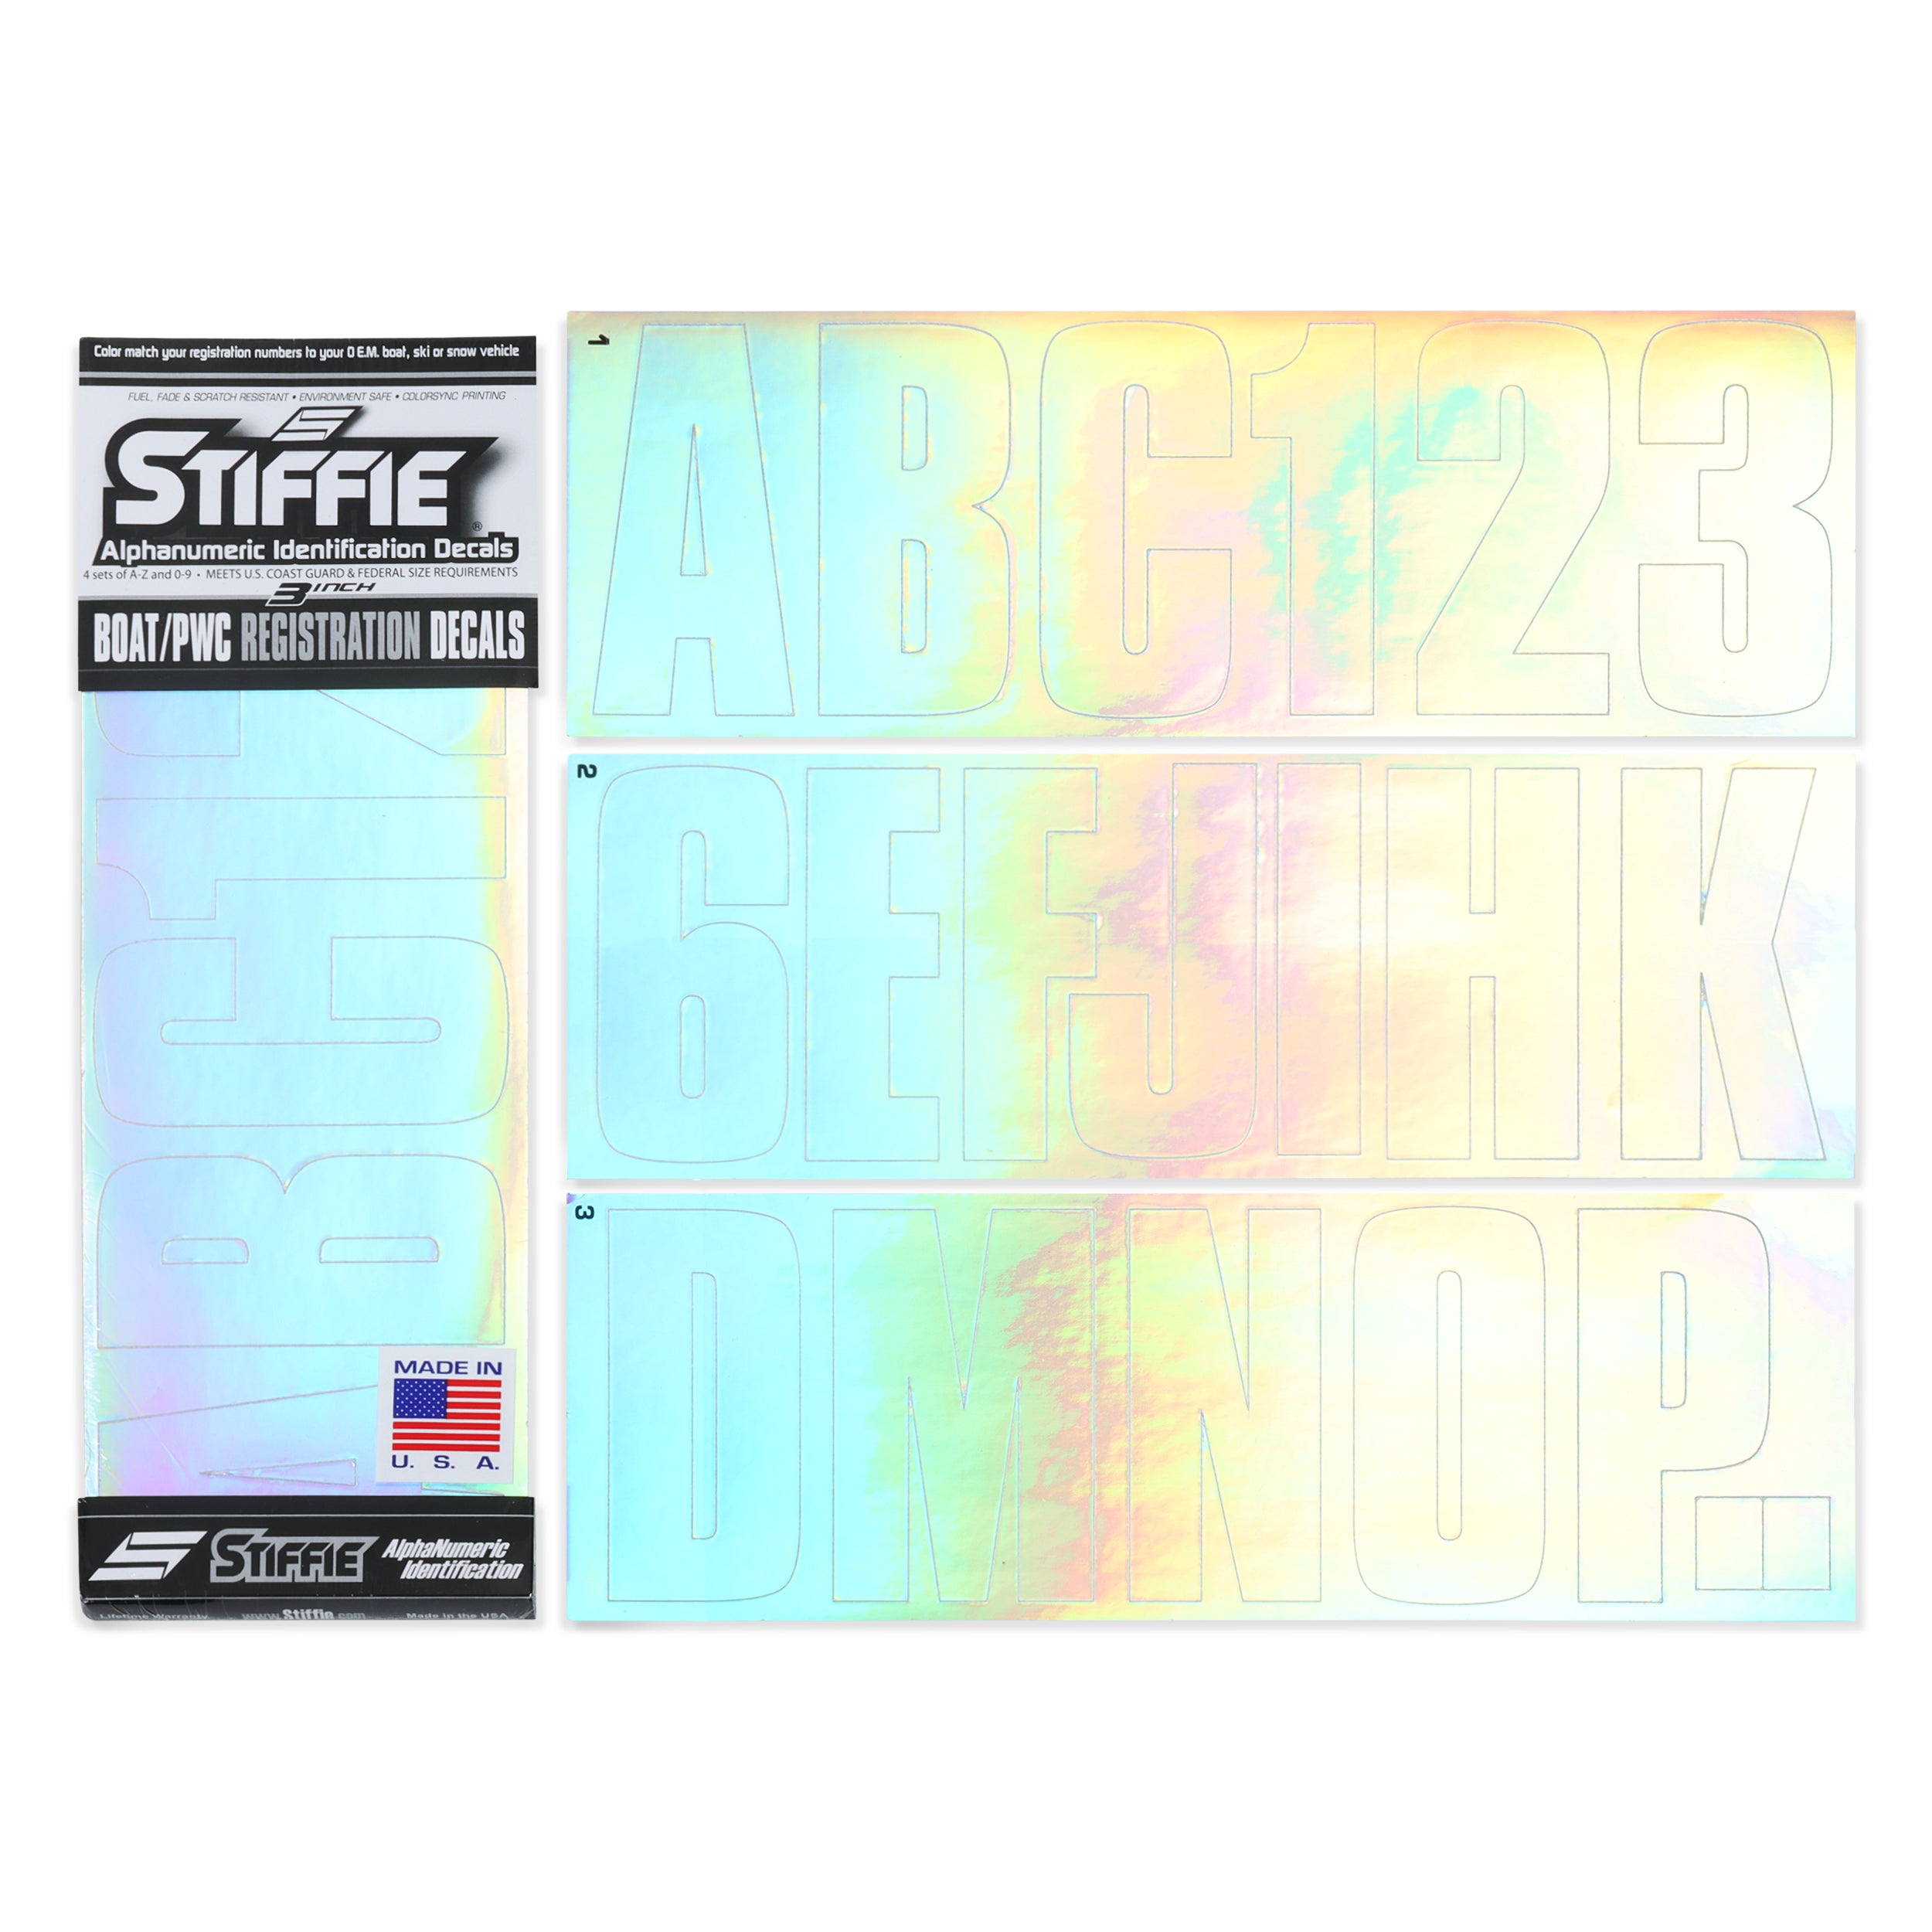 STIFFIE Uniline Chrome 3" ID Kit Alpha-Numeric Registration Identification Numbers Stickers Decals for Boats & Personal Watercraft